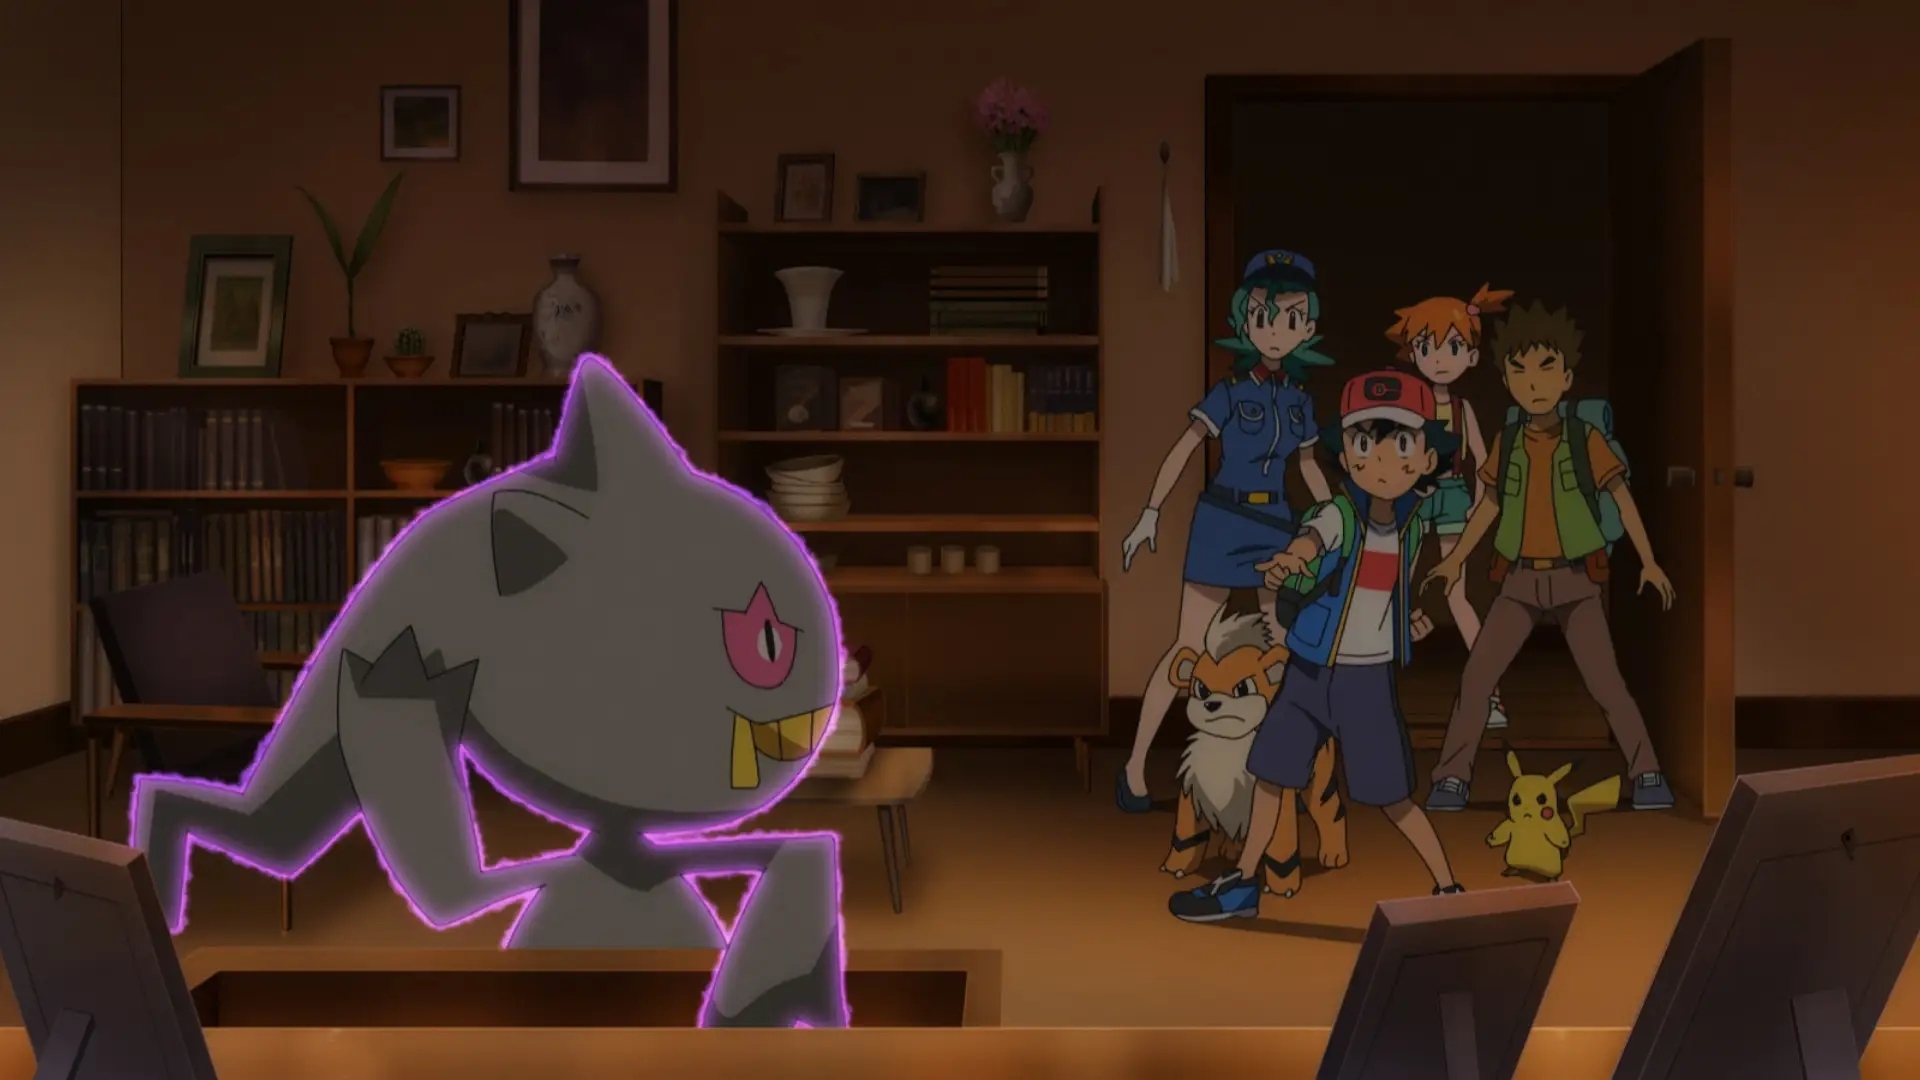 Screenshot of Banette being confronted by Ash, Pikachu, and the gang